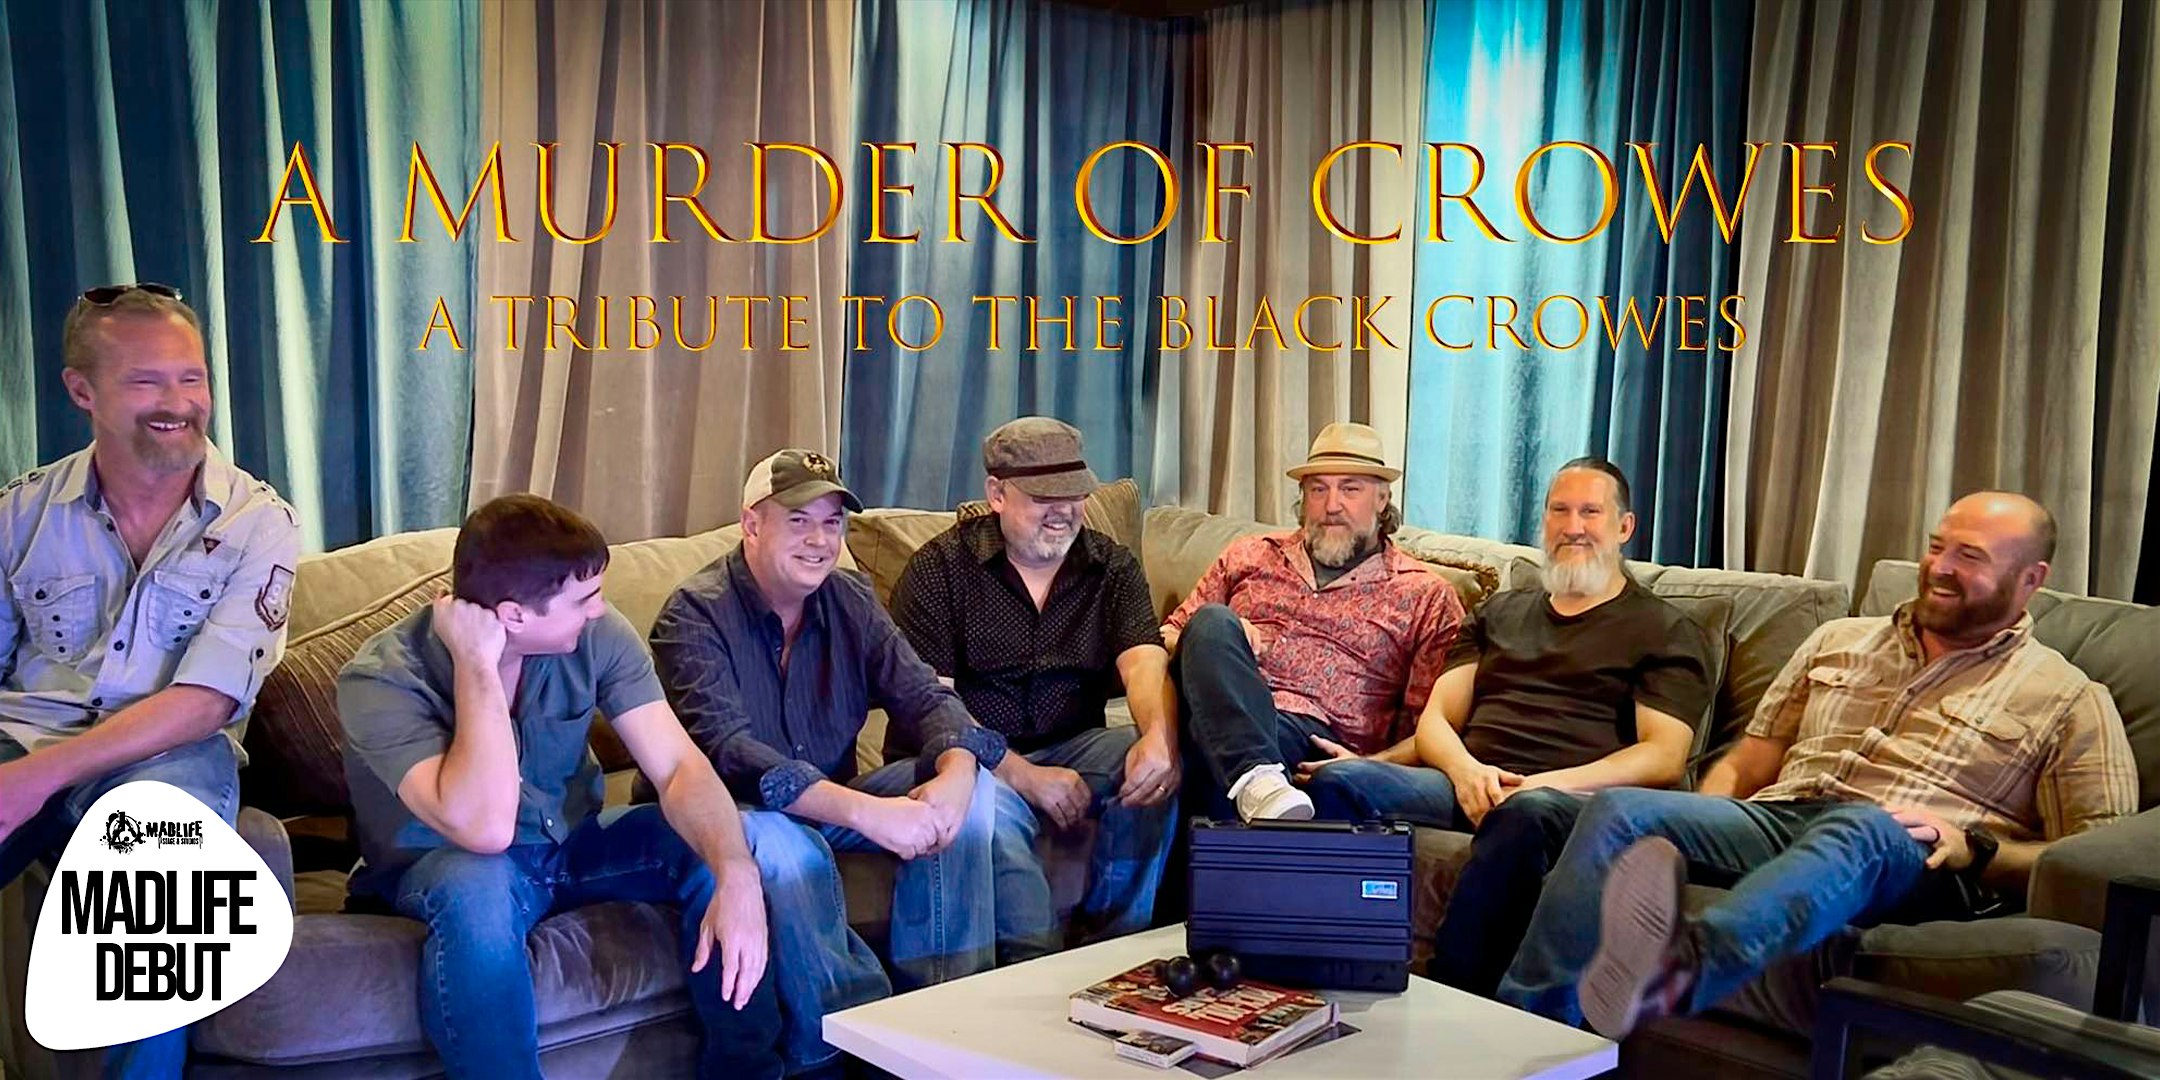 Black Crowes Tribute – A Murder of Crowes